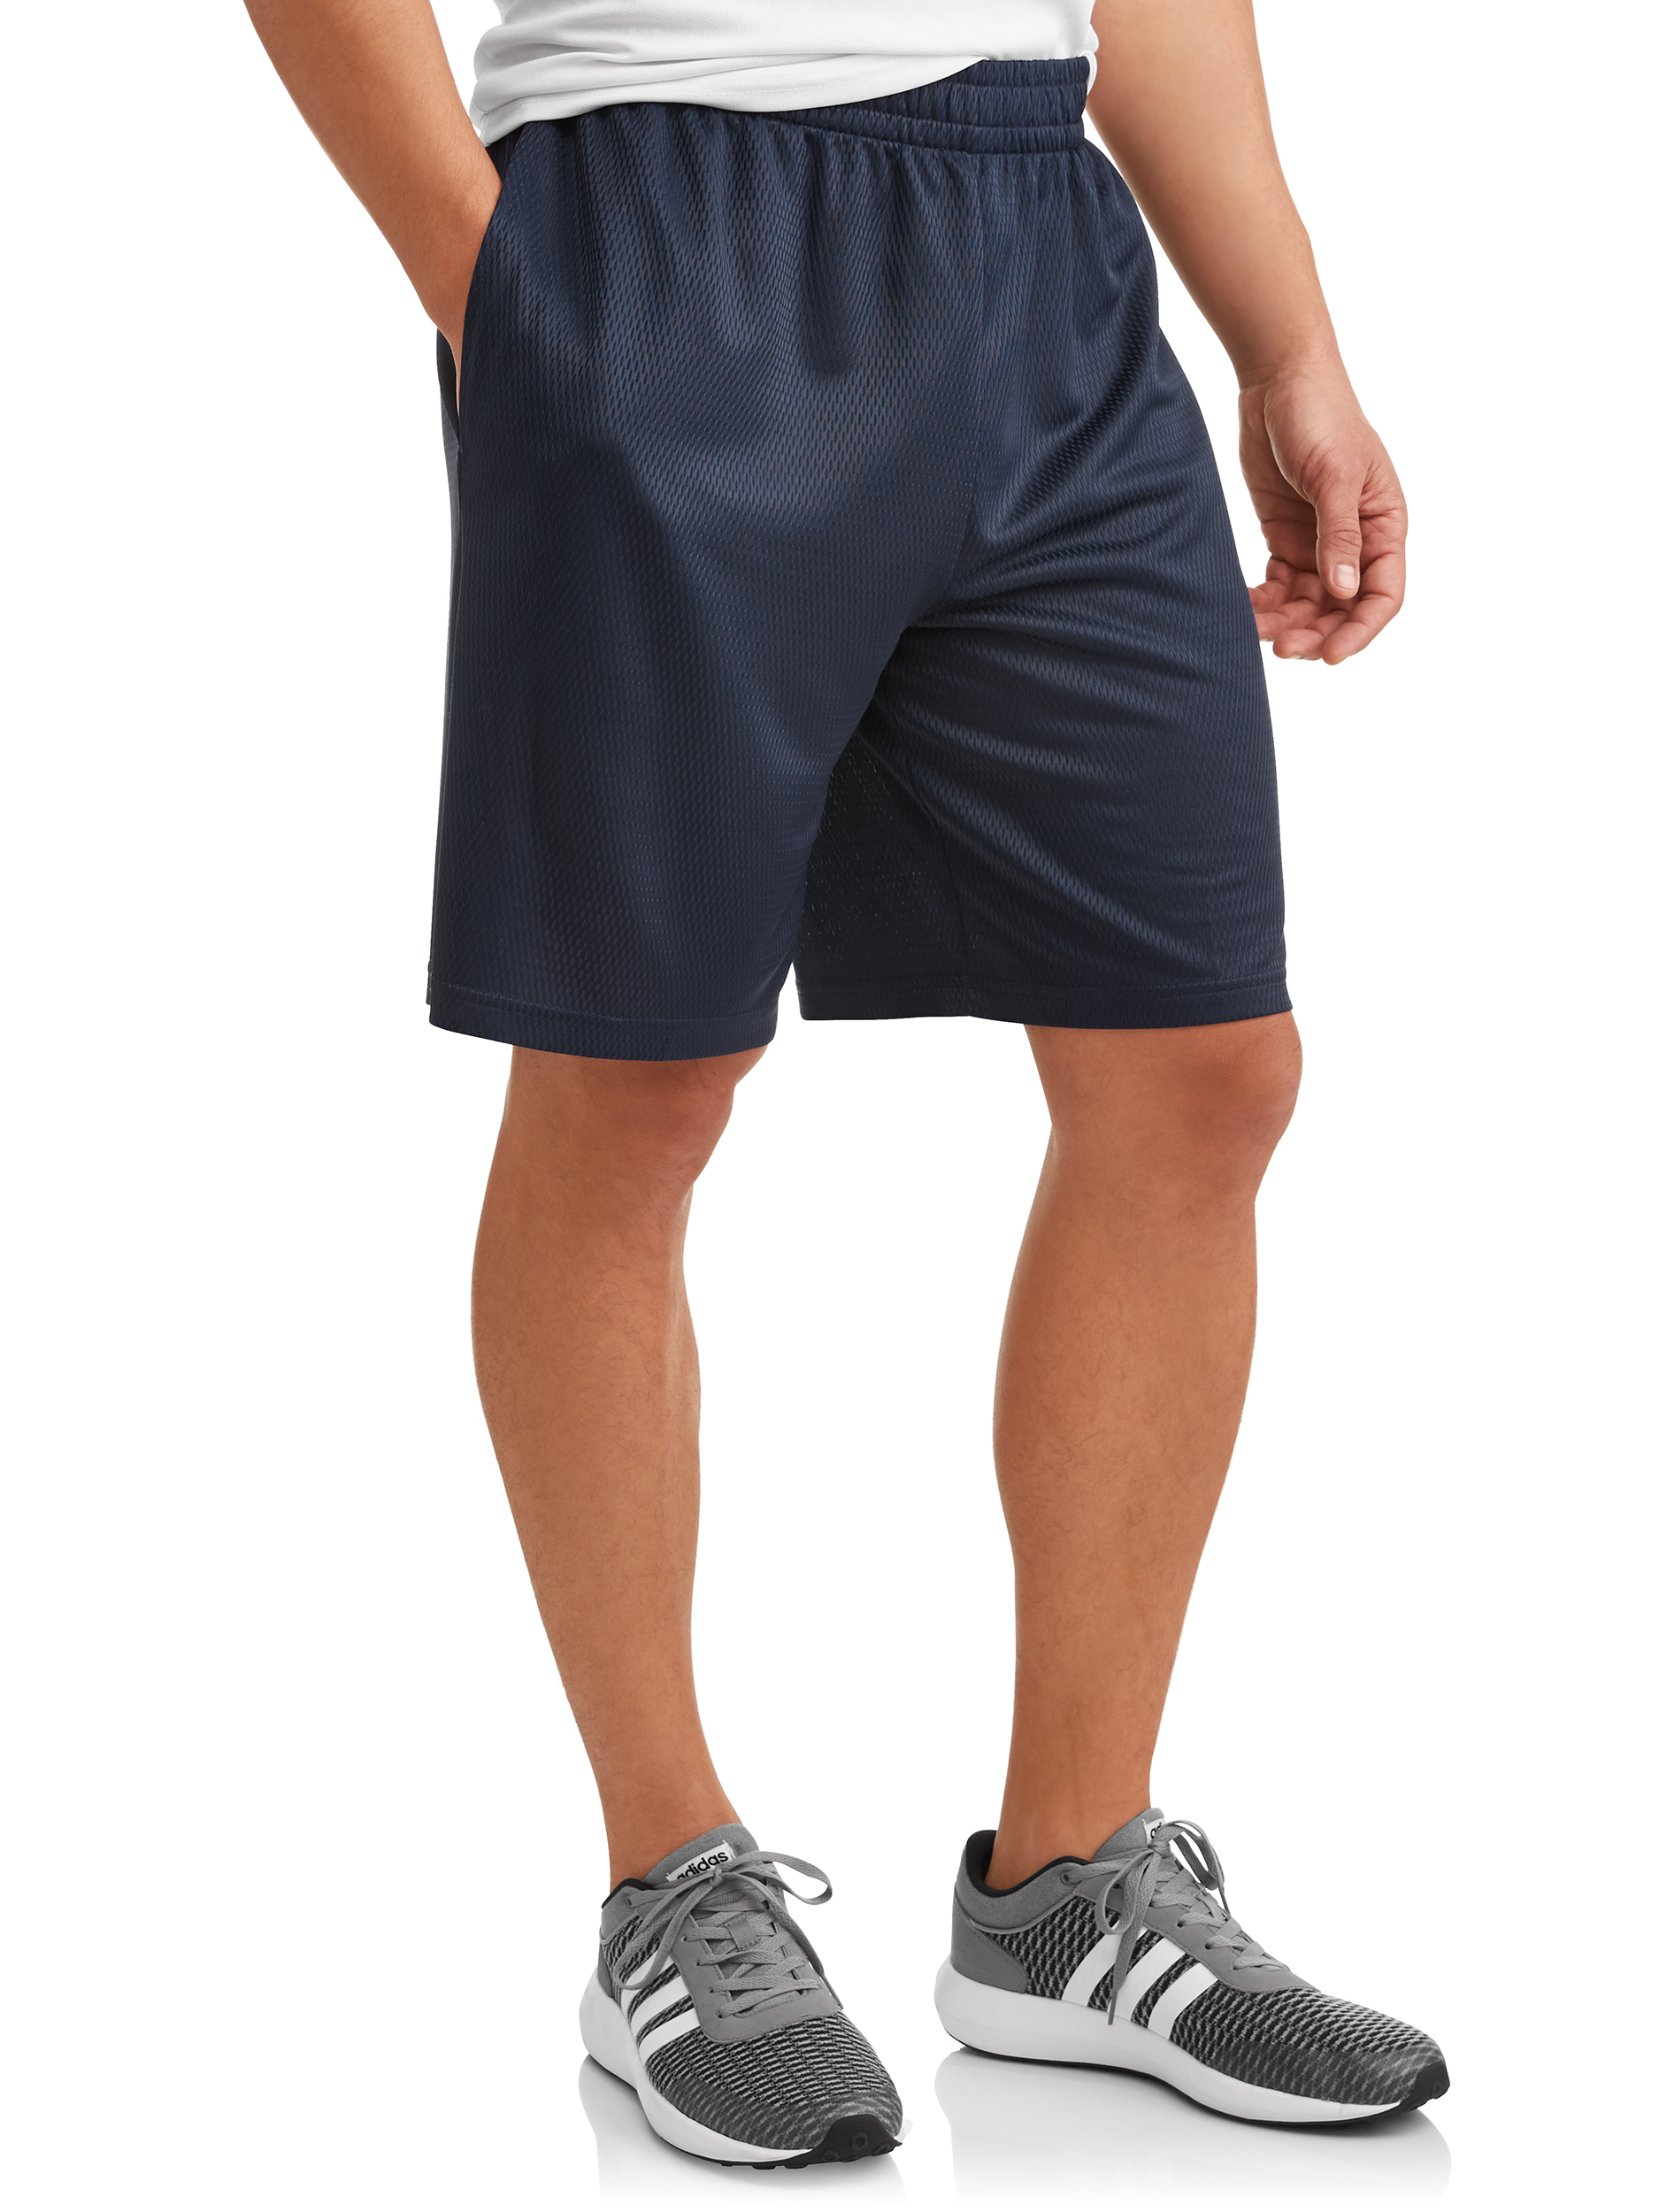 Athletic Works Men's and Big Men's 9" Dazzle Short, Up to 5XL - image 4 of 4